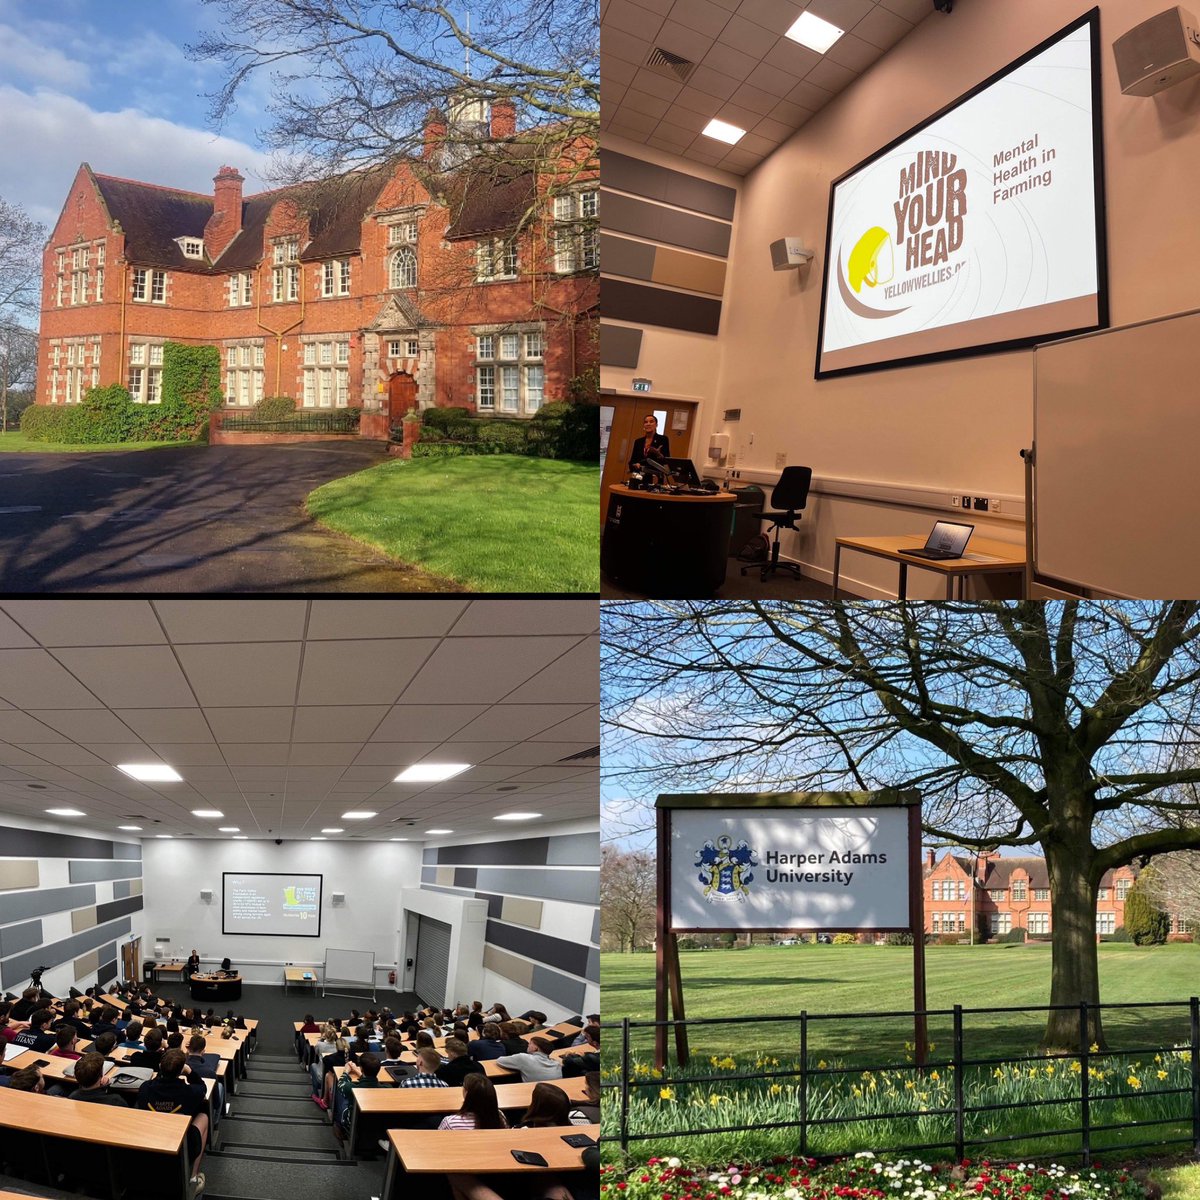 Our annual pre-placement talk at @HarperAdamsUni today… Placement Manager @Tez_Pickthall reminded me that this is actually the 8th year we have delivered this important session to the ag students embarking on their placement year - wow time flies… Good luck folks 💛